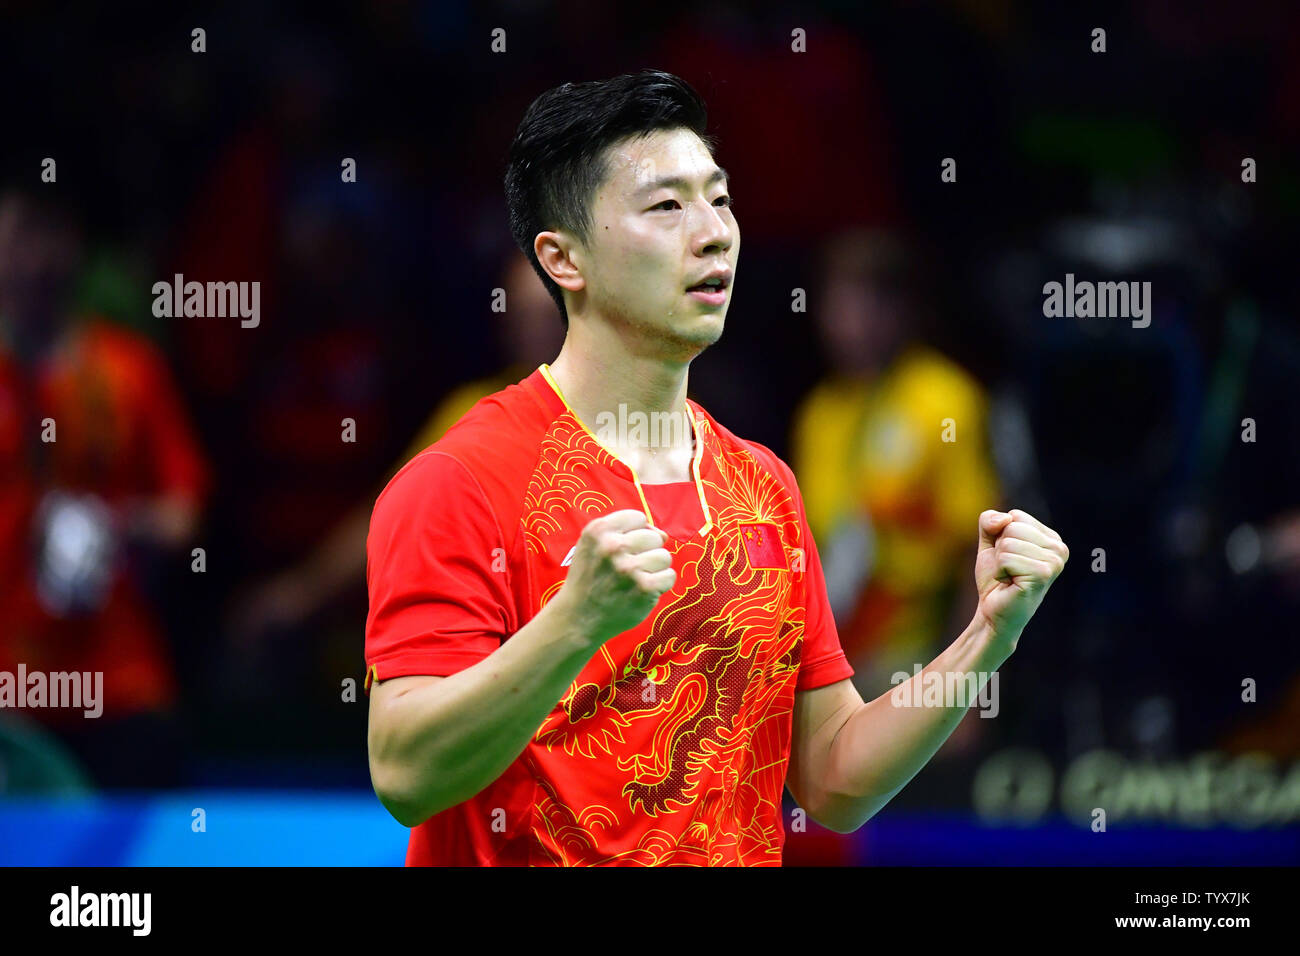 China's Ma Long celebrates in the final moments of his gold medal match against China's Zhang Jike in the Men's Singles Table Tennis final round 2016 Rio Summer Olympics in Rio de Janeiro, Brazil, August 11, 2016. Long went on to win gold for his second straight Olympic champion title. Photo by Kevin Dietsch/UPI Stock Photo